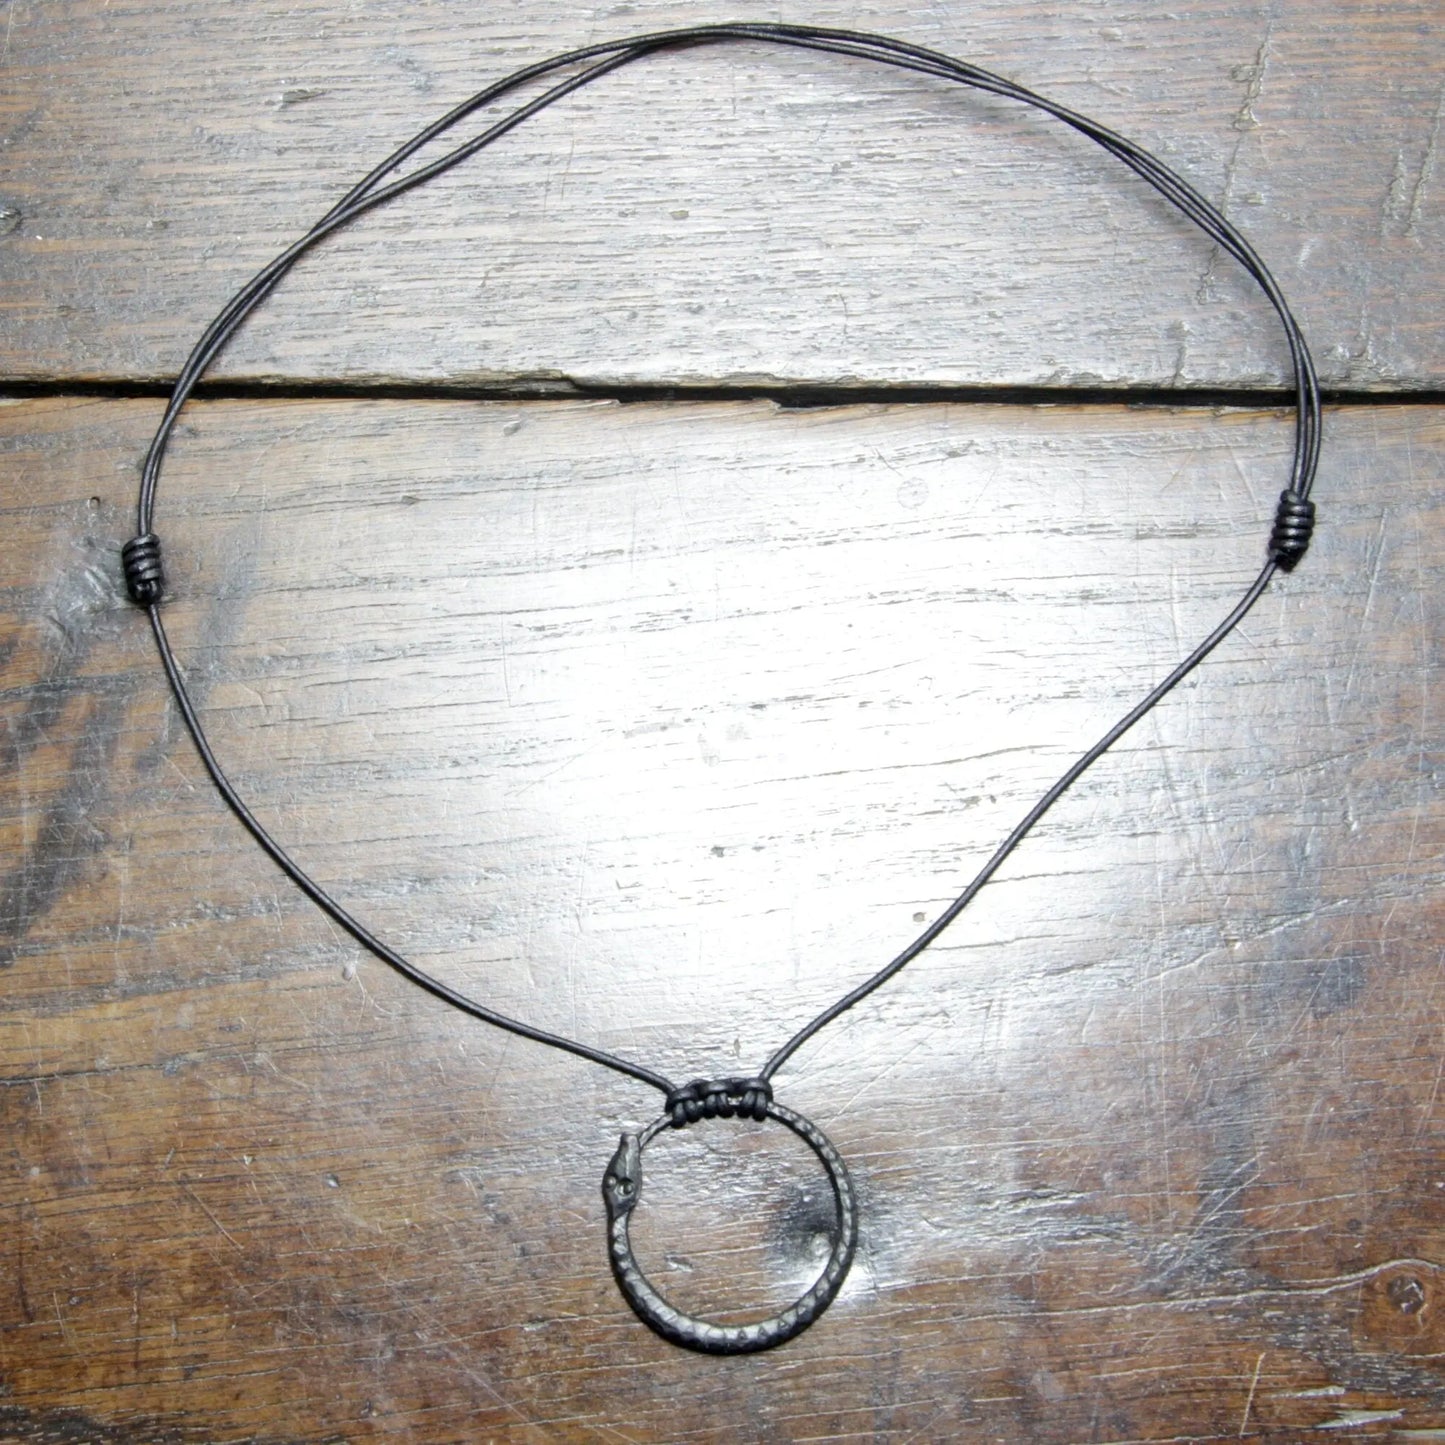 Ouroboros Snake Pendant, an infinity symbol hand forged out of pure iron